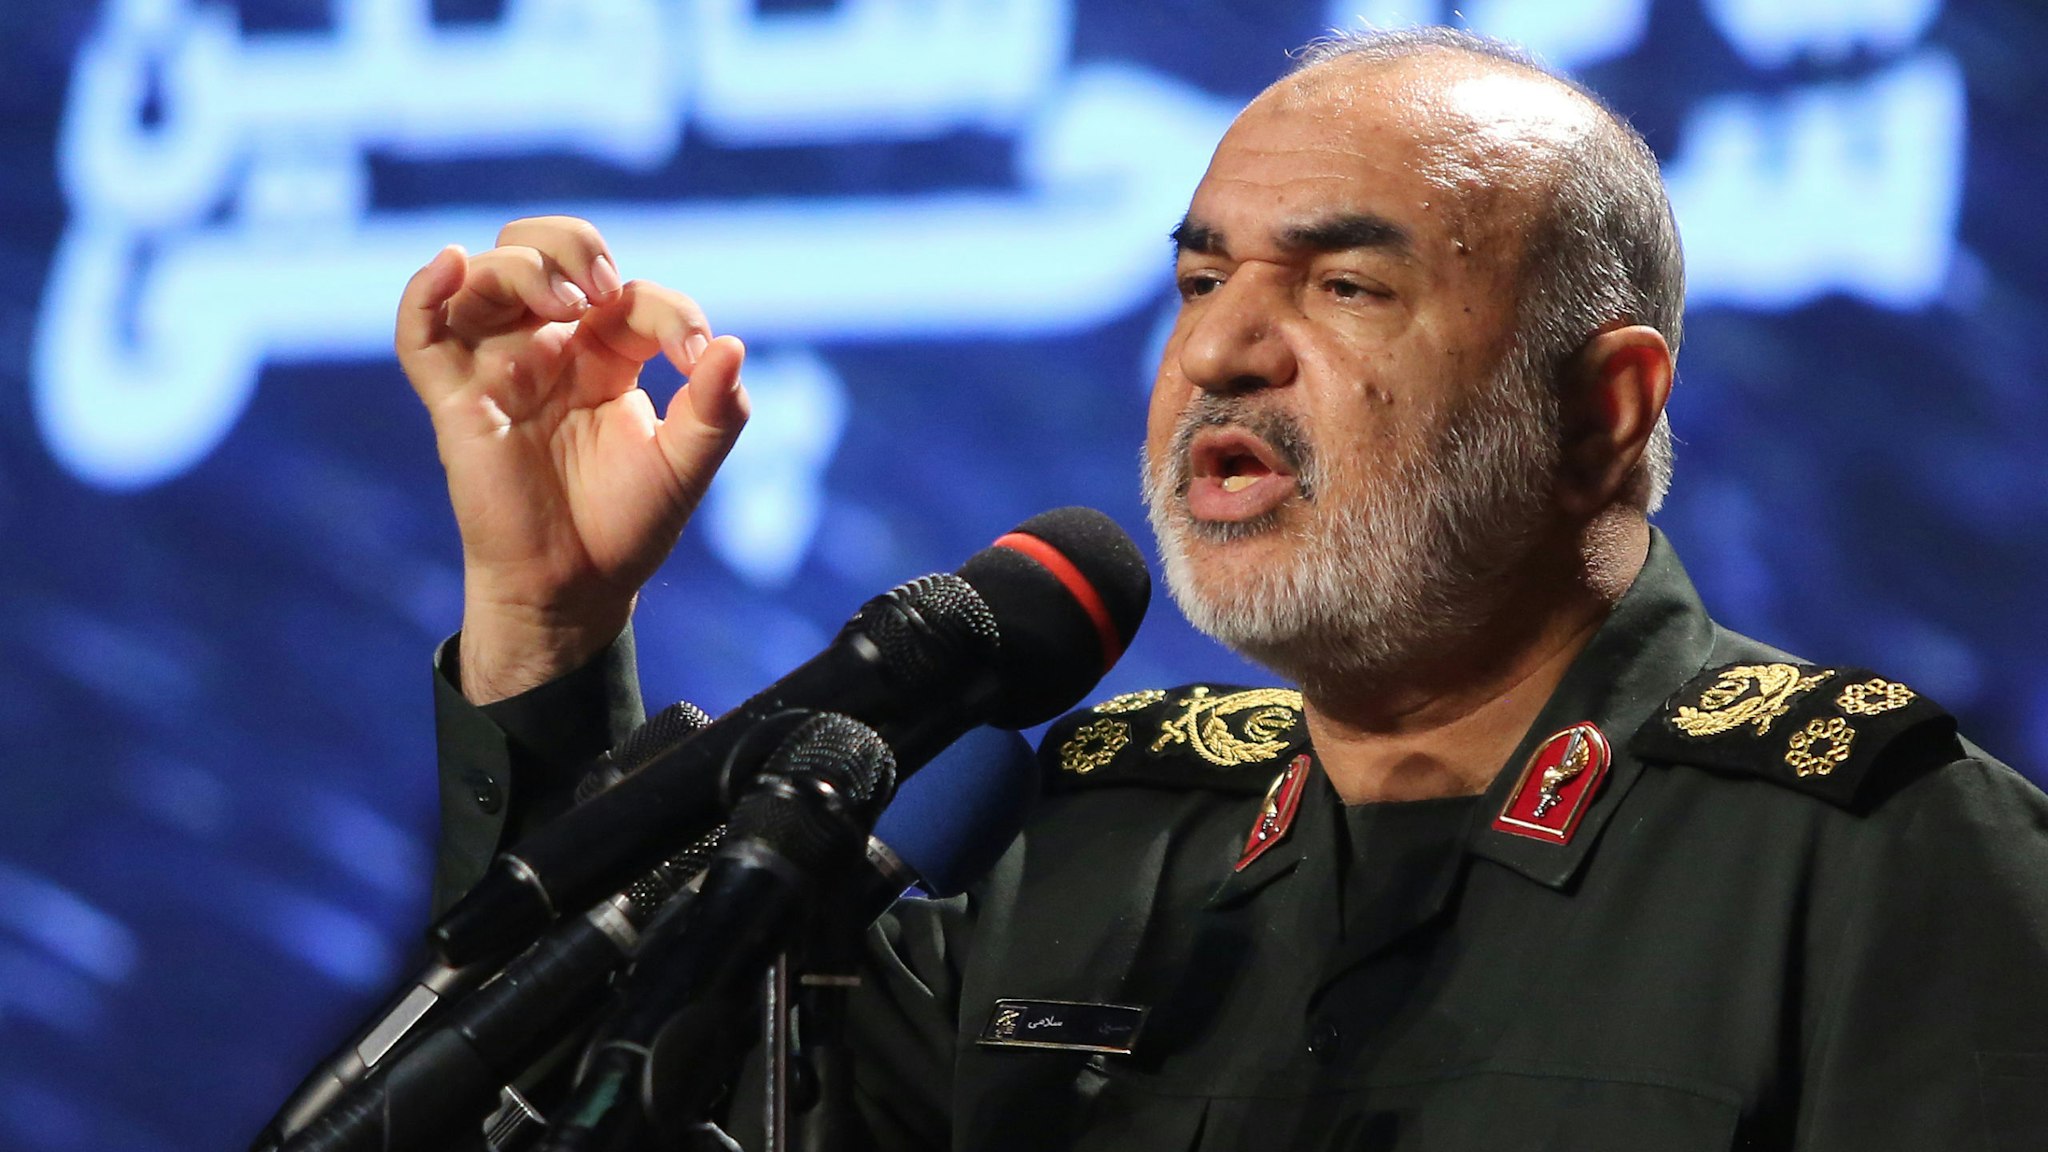 Iranian Revolutionary Guards commander Major General Hossein Salami speaks at Tehran's Islamic Revolution and Holy Defence museum, during the unveiling of an exhibition of what Iran says are US and other drones captured in its territory, in the capital Tehran on September 21, 2019. - Iran's Revolutionary Guards commander today warned any country that attacks the Islamic republic will see its territory become the "main battlefield" as he opened an exhibition of captured drones.